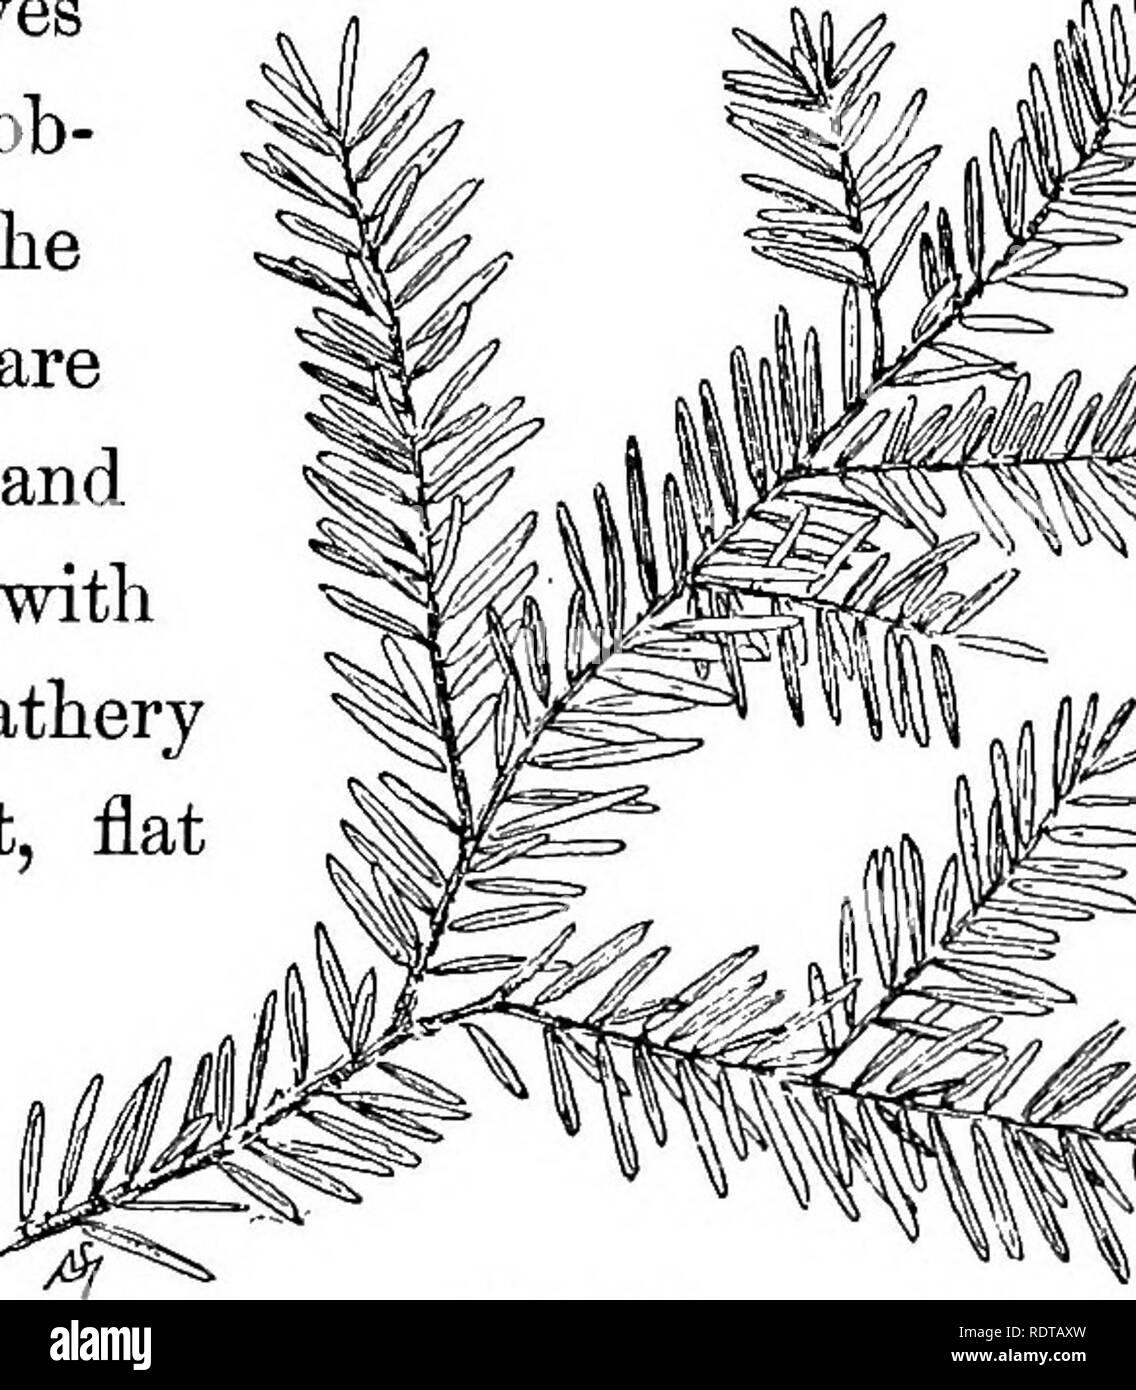 . Familiar trees and their leaves . Trees. CHAPTEE XXII. V. Evergreen Leaves. 2. With short, flat, blunt needles, or with soft needles. THE HEMLOCK, FIR, AND LARCH. Hemlock. Theee is no more graceful and orna- Tsuga Canadensis, mental evergreen tree than the hem- lock when it grows in the open, where it receives the full benefit of unob- structed sunlight. The boughs of this tree are plumelike, drooping, and spread out laterally with an appearance of feathery lightness. Its blunt, flat needles, about half an inch long, are the most lustrous dark green imag- inable, with a delicate whitish tint Stock Photo